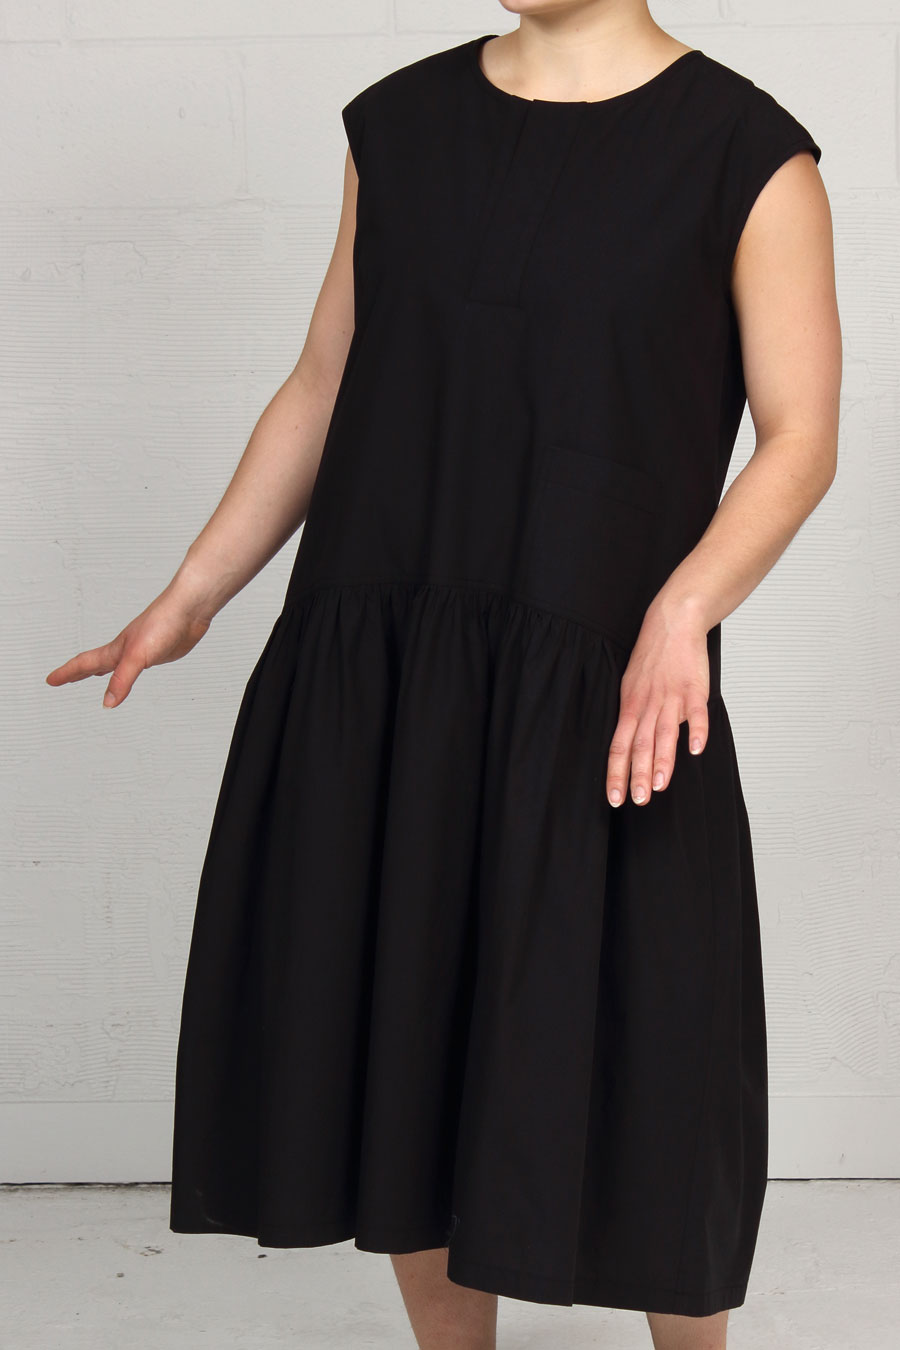 Solid Cotton Sewing Dress - Black